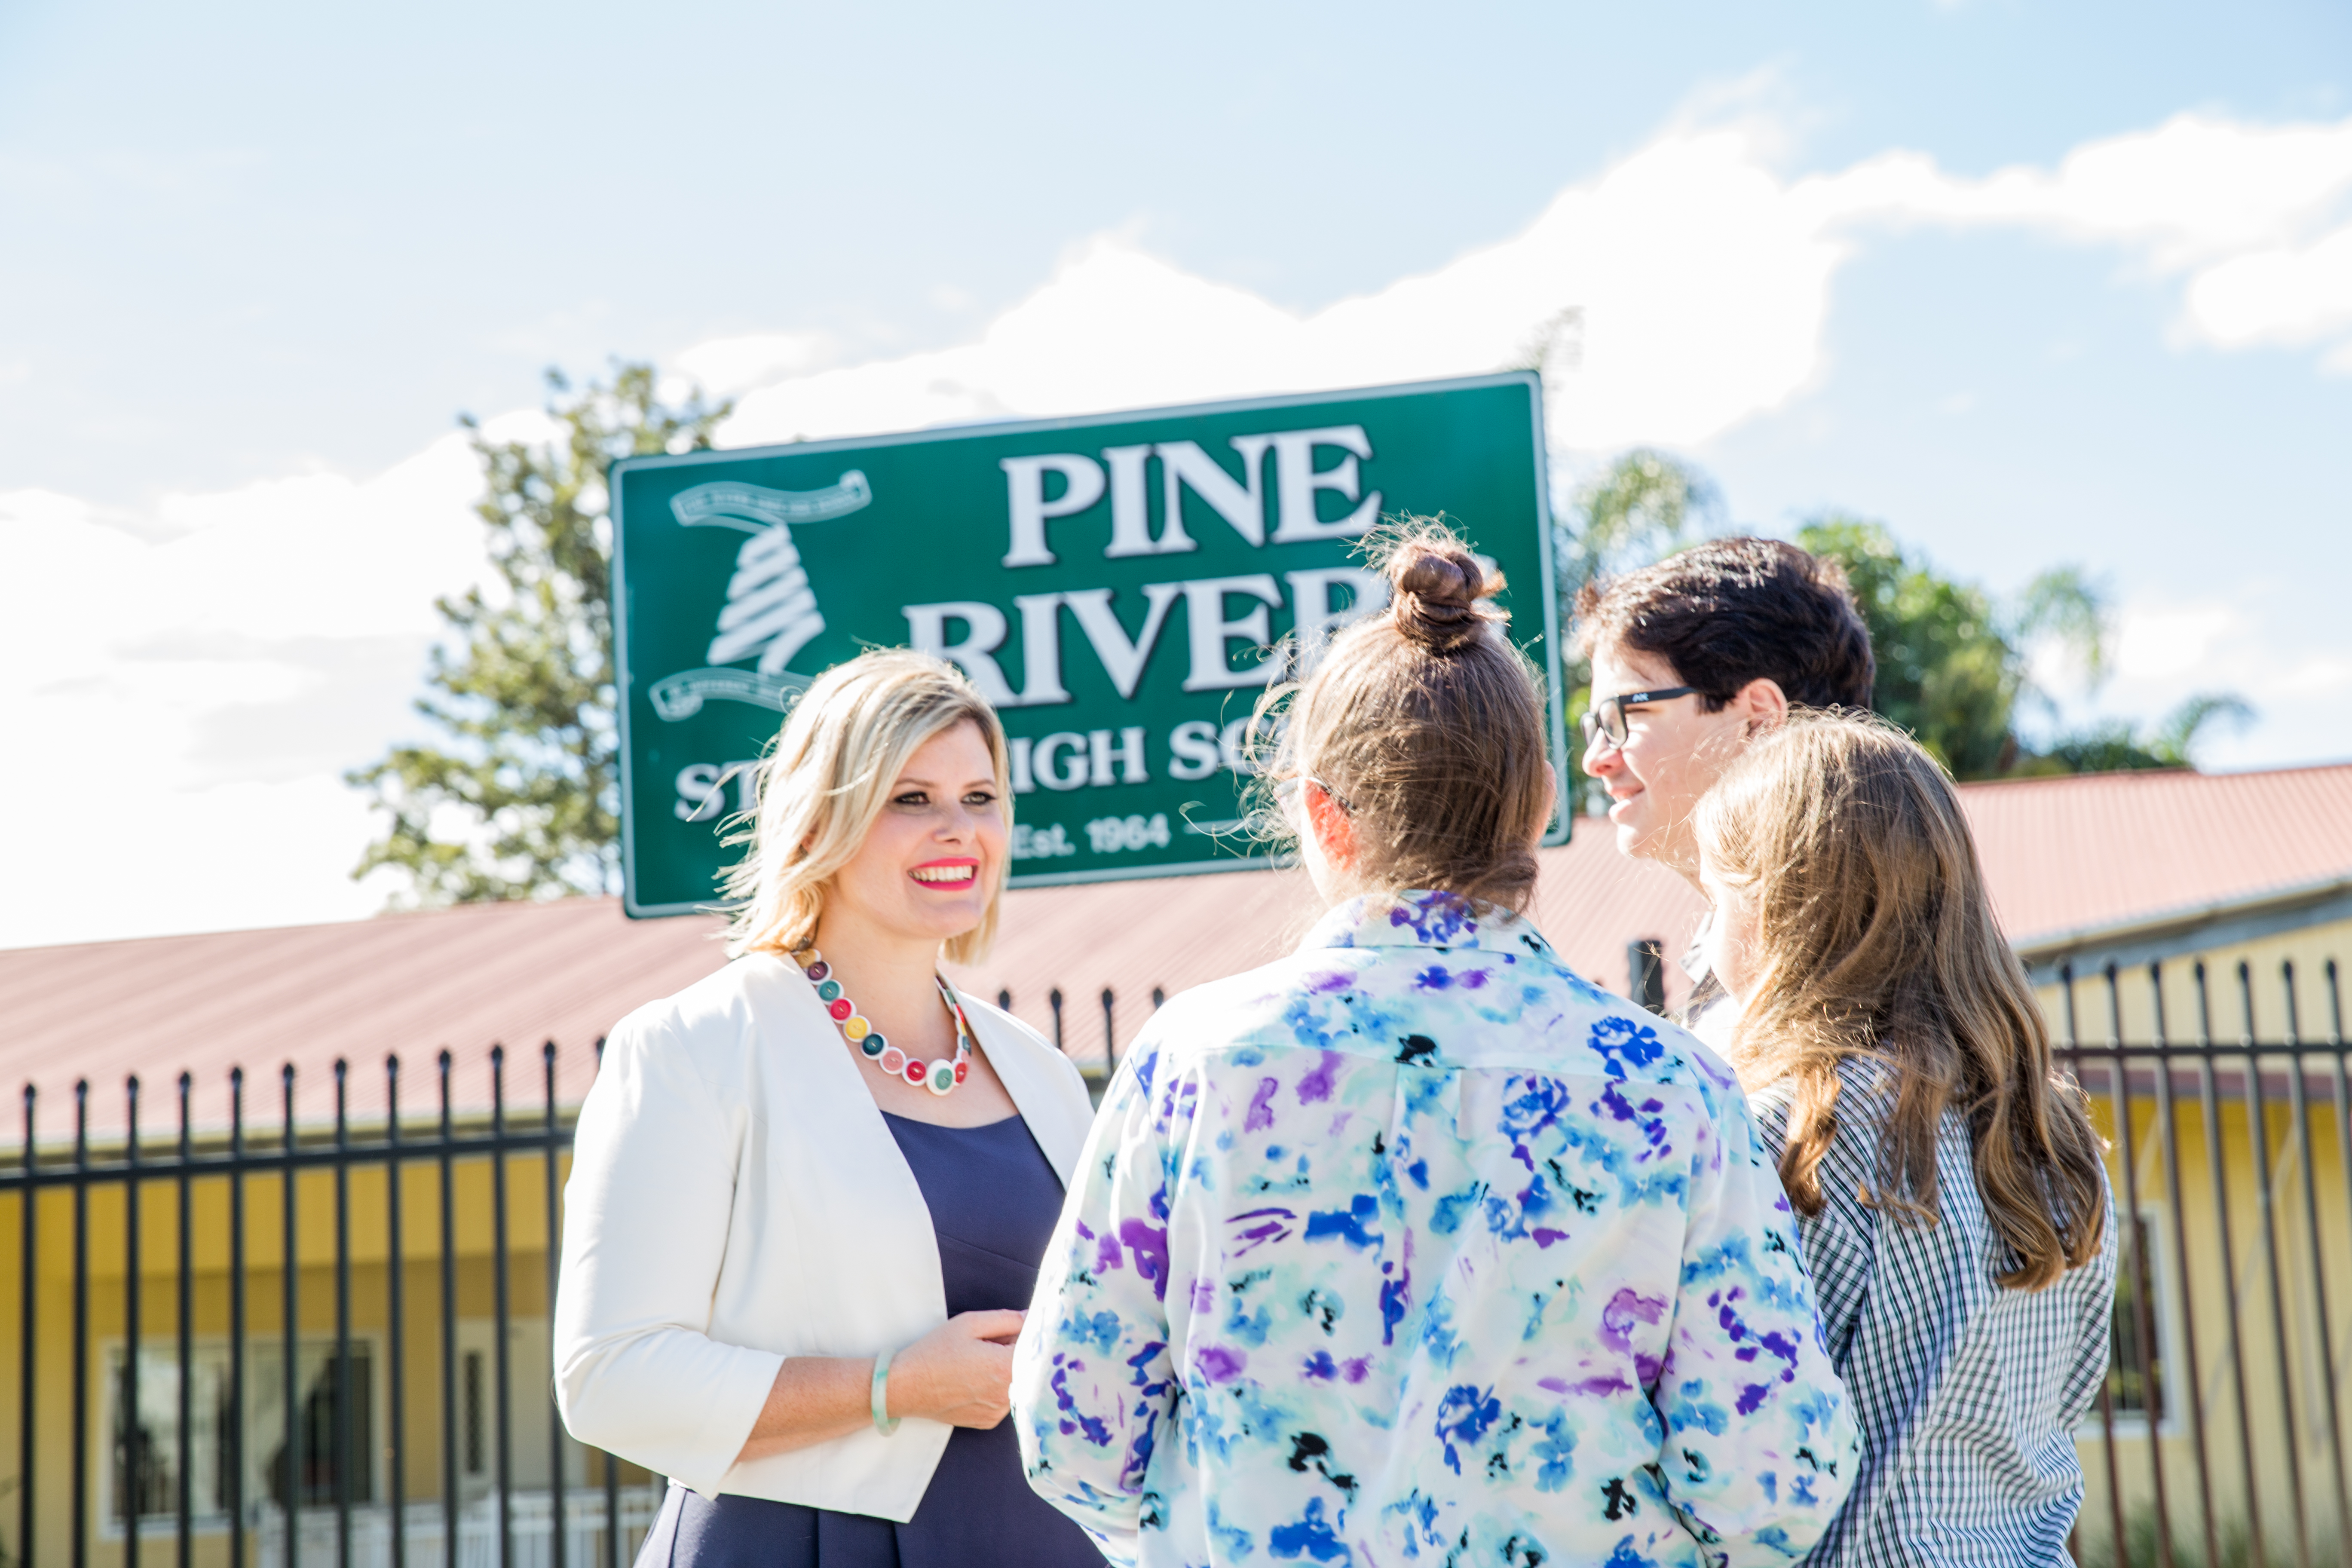 Education means new opportunities for everyone in Pine Rivers